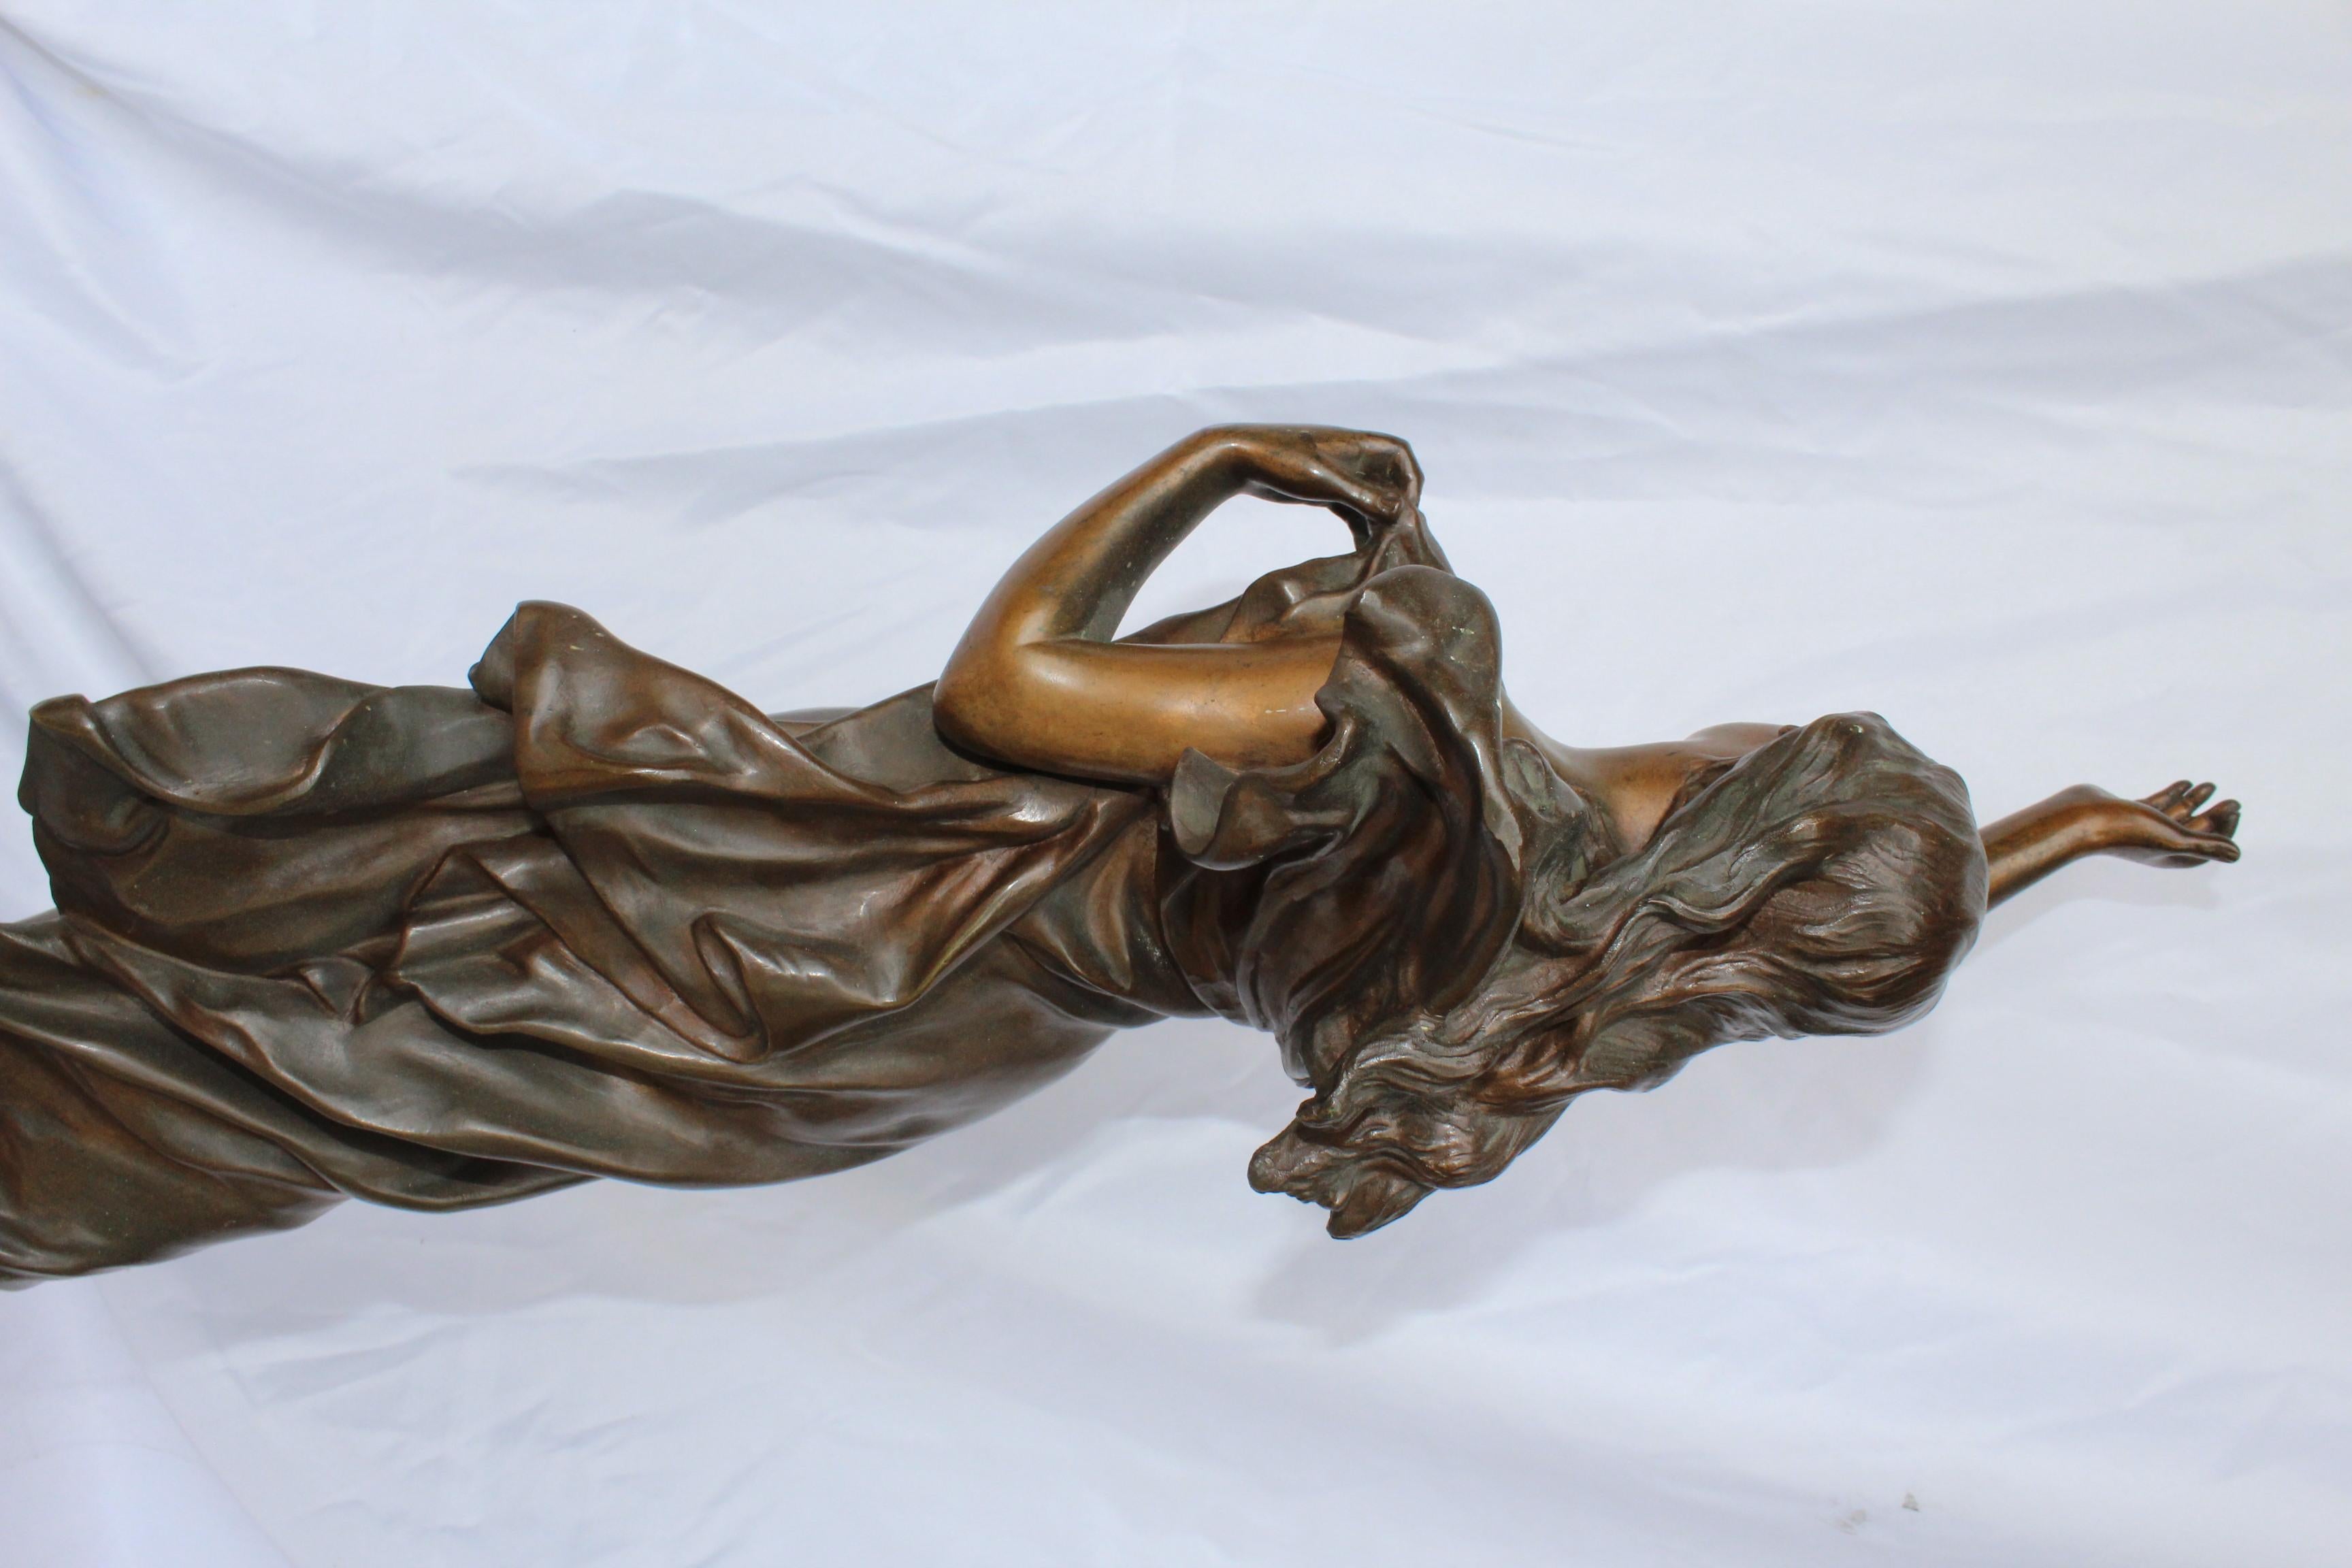 An graceful lady on one foot, signed by Artist A. Gaudez who won a Gold medal for this piece circa 1890s exhibition in Paris. Base is well marked with his signature and the title Etoile Du Matin and Hdrs Honcouns. From a private collection well take